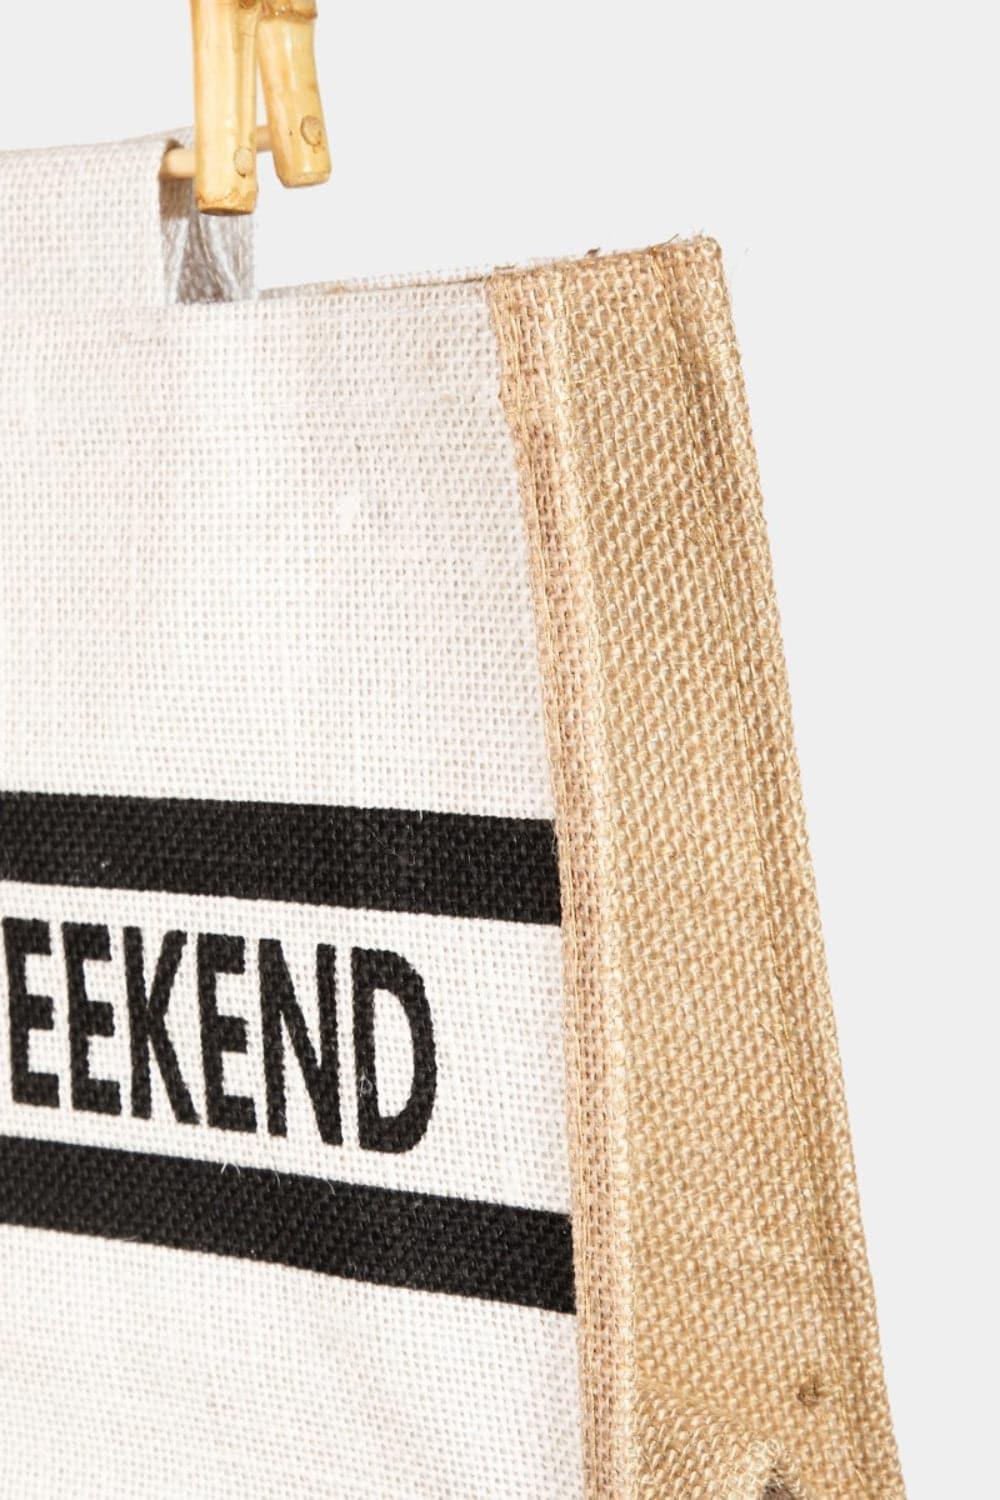 Fame Bamboo Handle Hello Weekend Tote Bag - SwagglyLife Home & Fashion